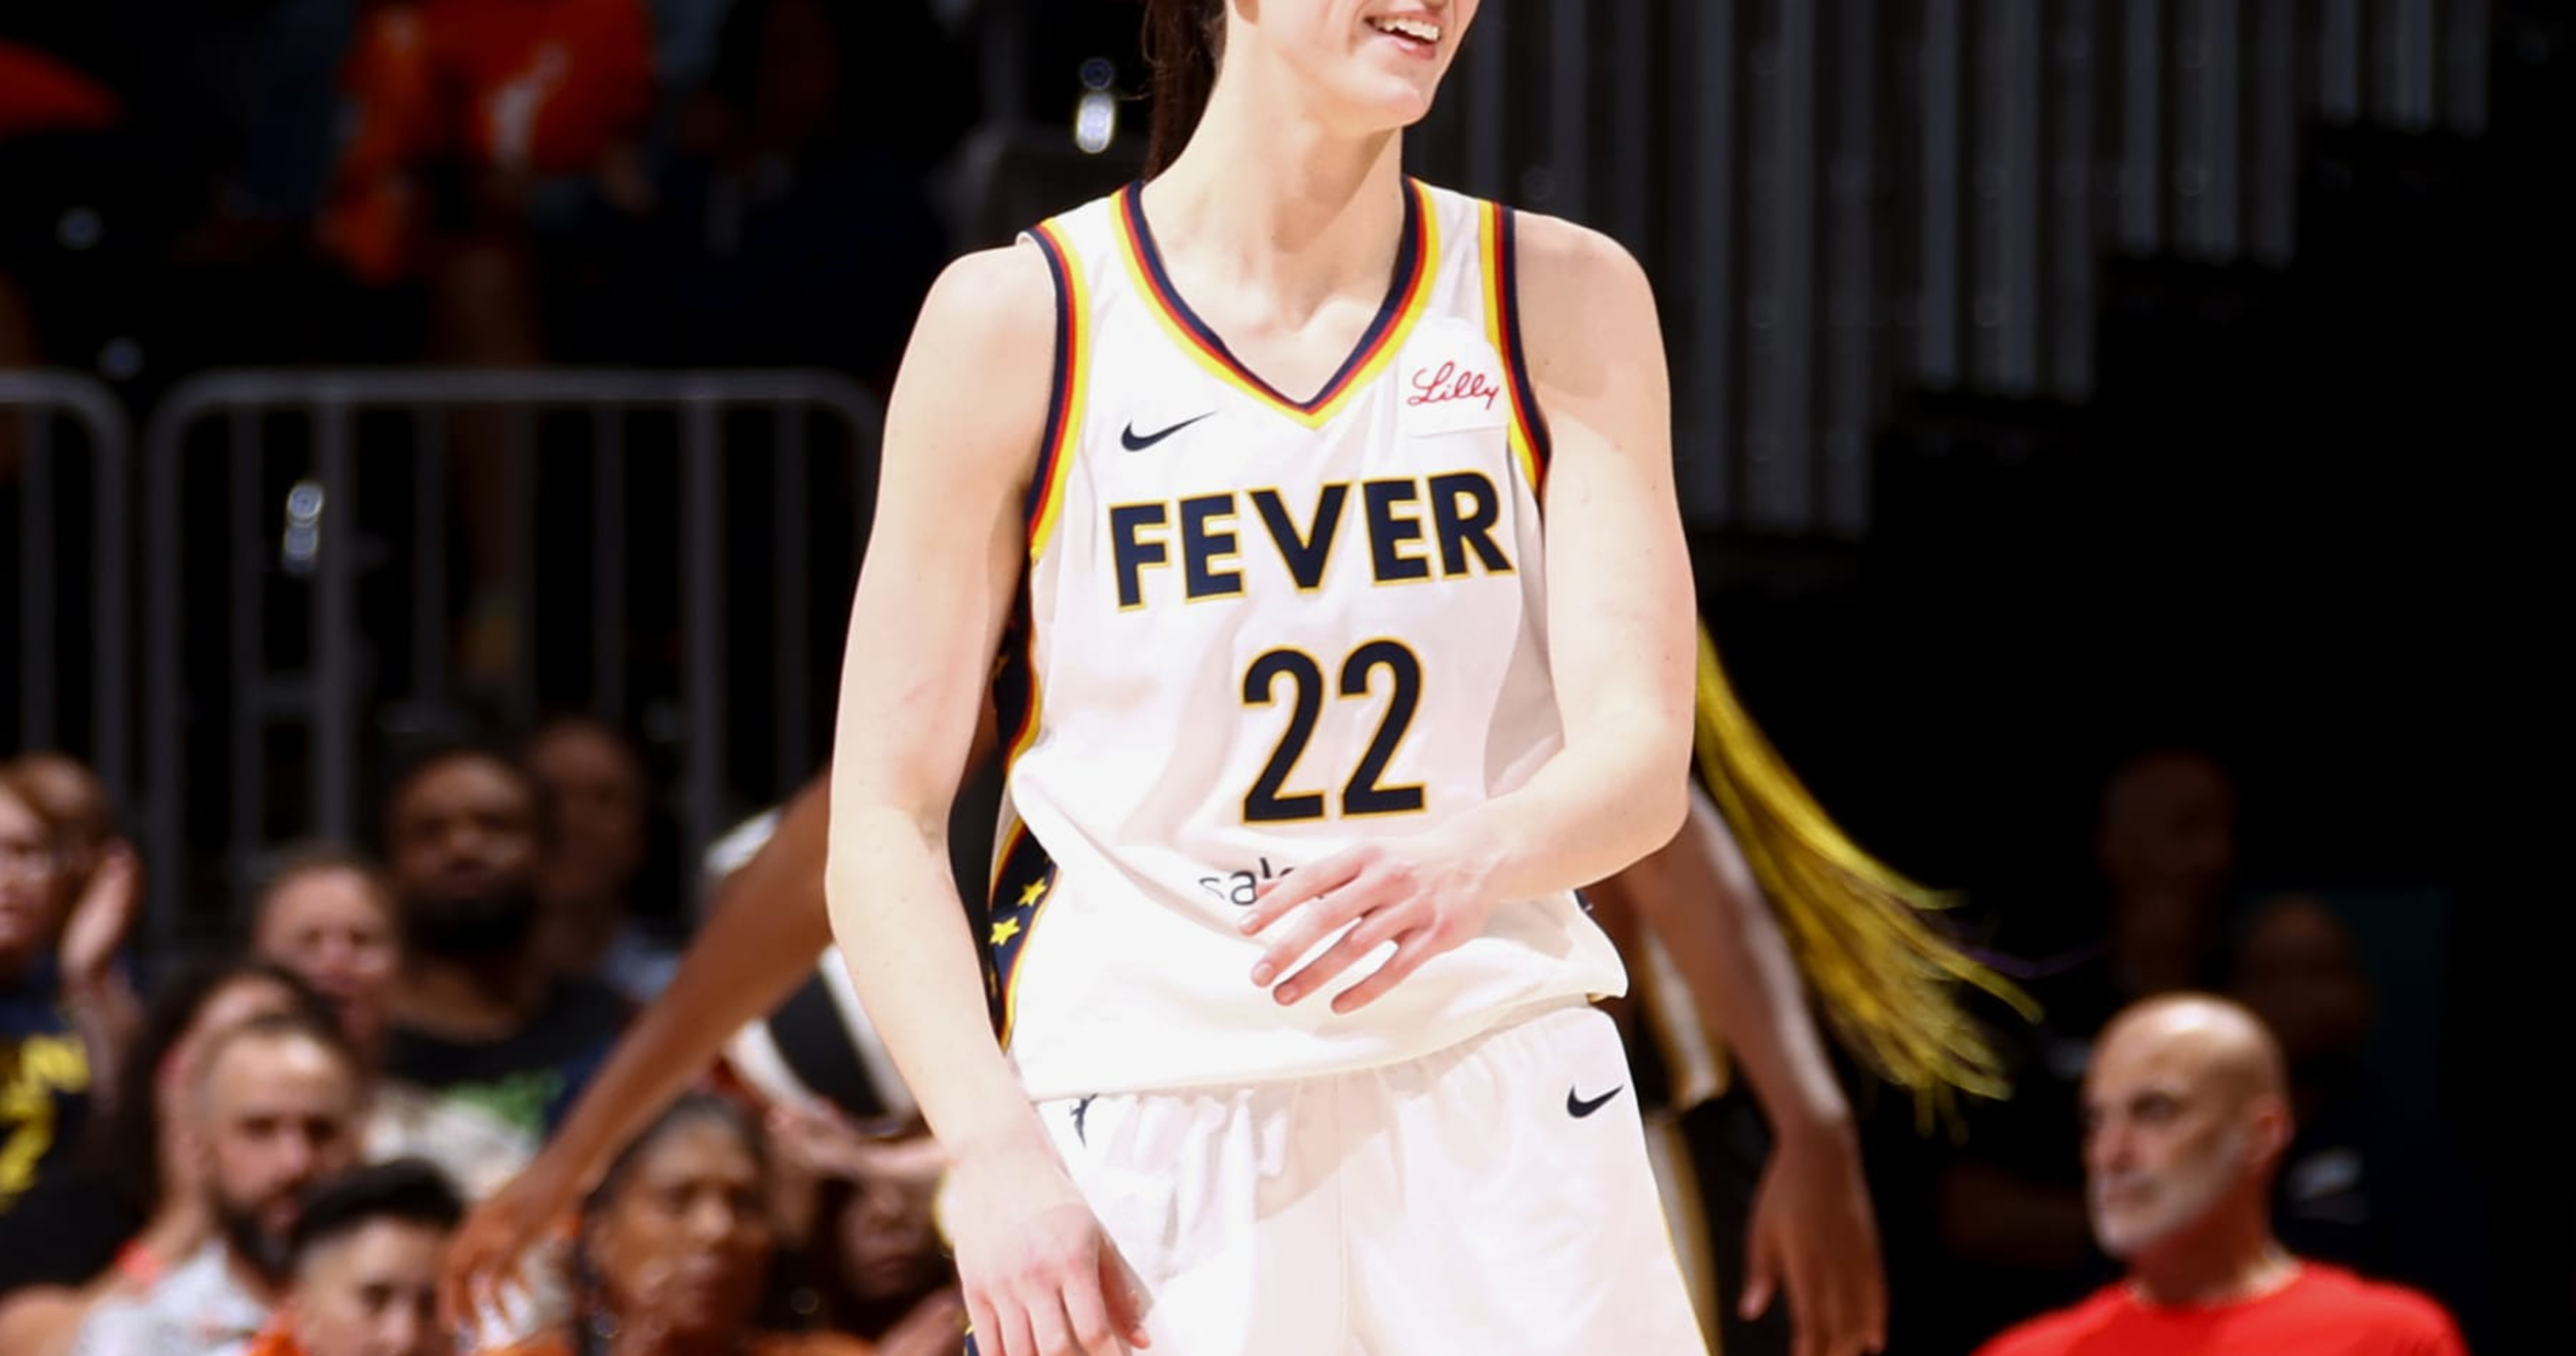 Fever HC: 'Disappointed' Caitlin Clark Missed USA Roster, Will Have Chances in Future